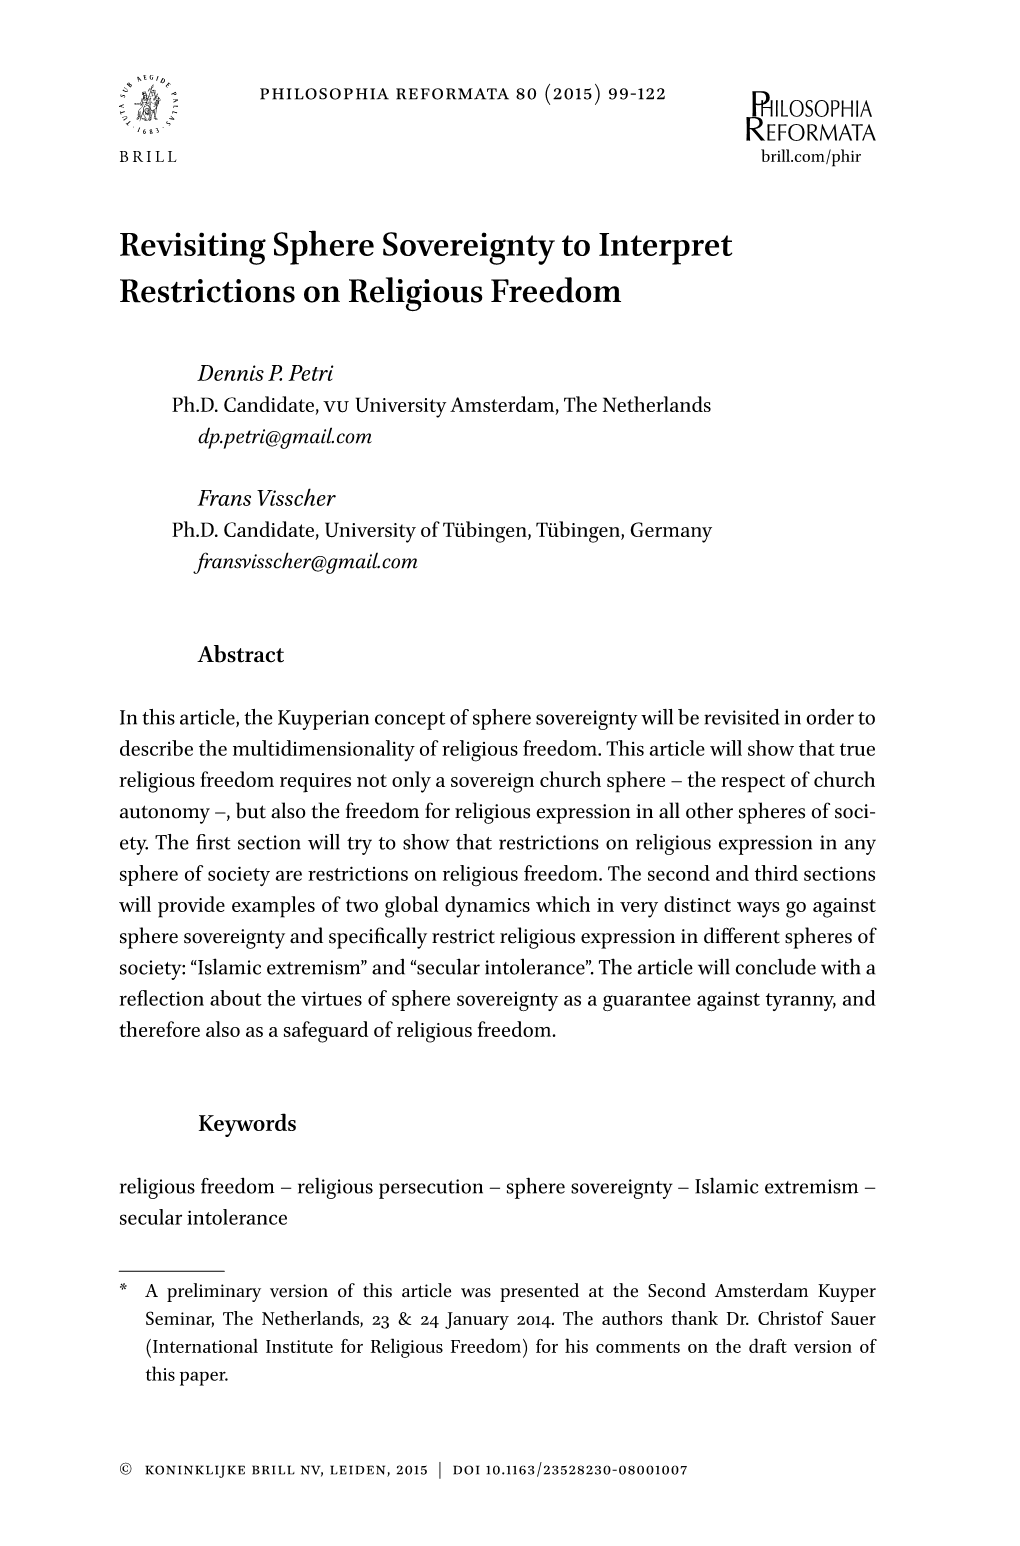 Revisiting Sphere Sovereignty to Interpret Restrictions on Religious Freedom